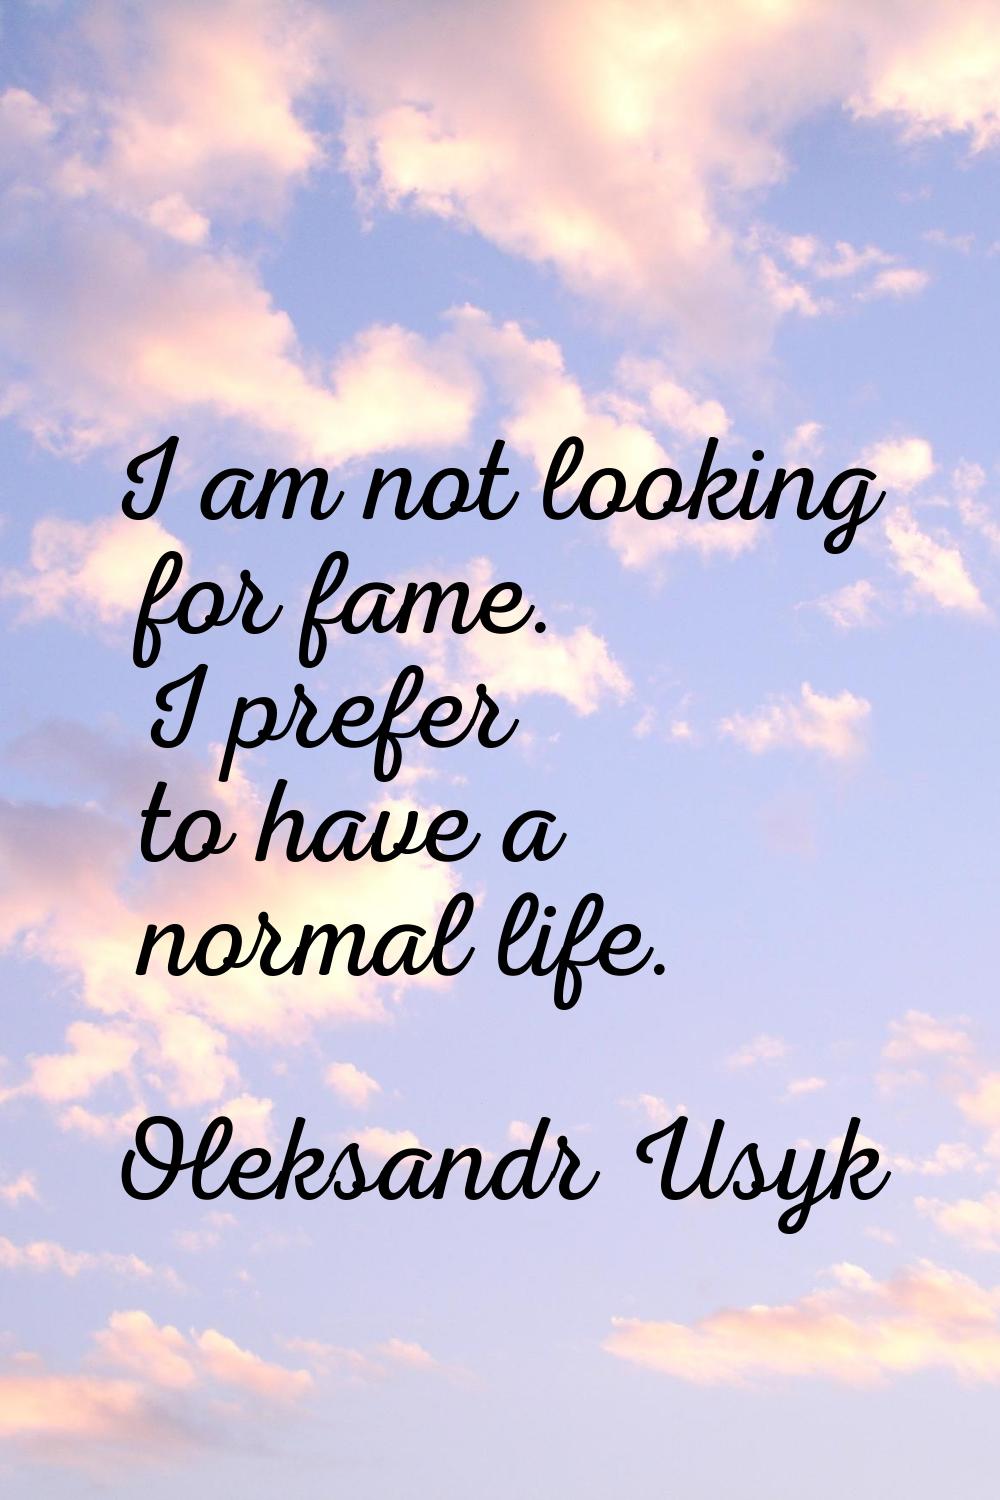 I am not looking for fame. I prefer to have a normal life.